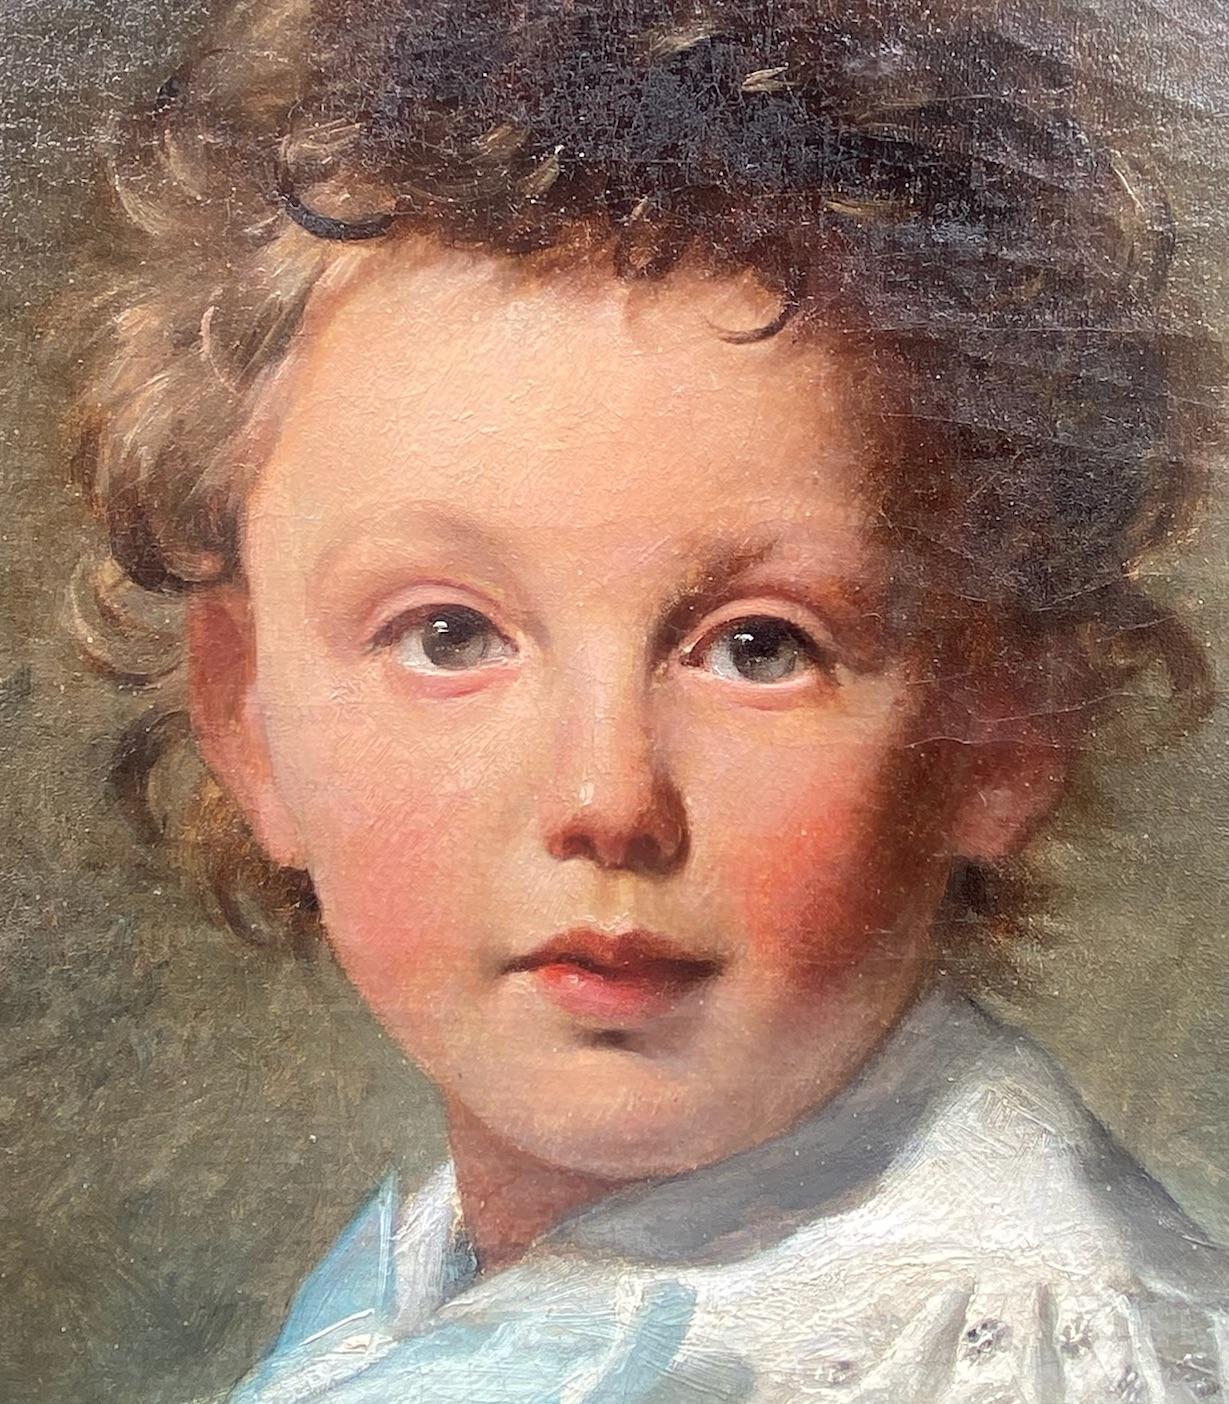 This sweet little boy sits quietly like a well brought up child, but you can see in his eyes how much he likes to run and play. In this sensitive portrait painted in circa 1860 by Félix Pescador we see a  real lively kid, not a miniature adult.